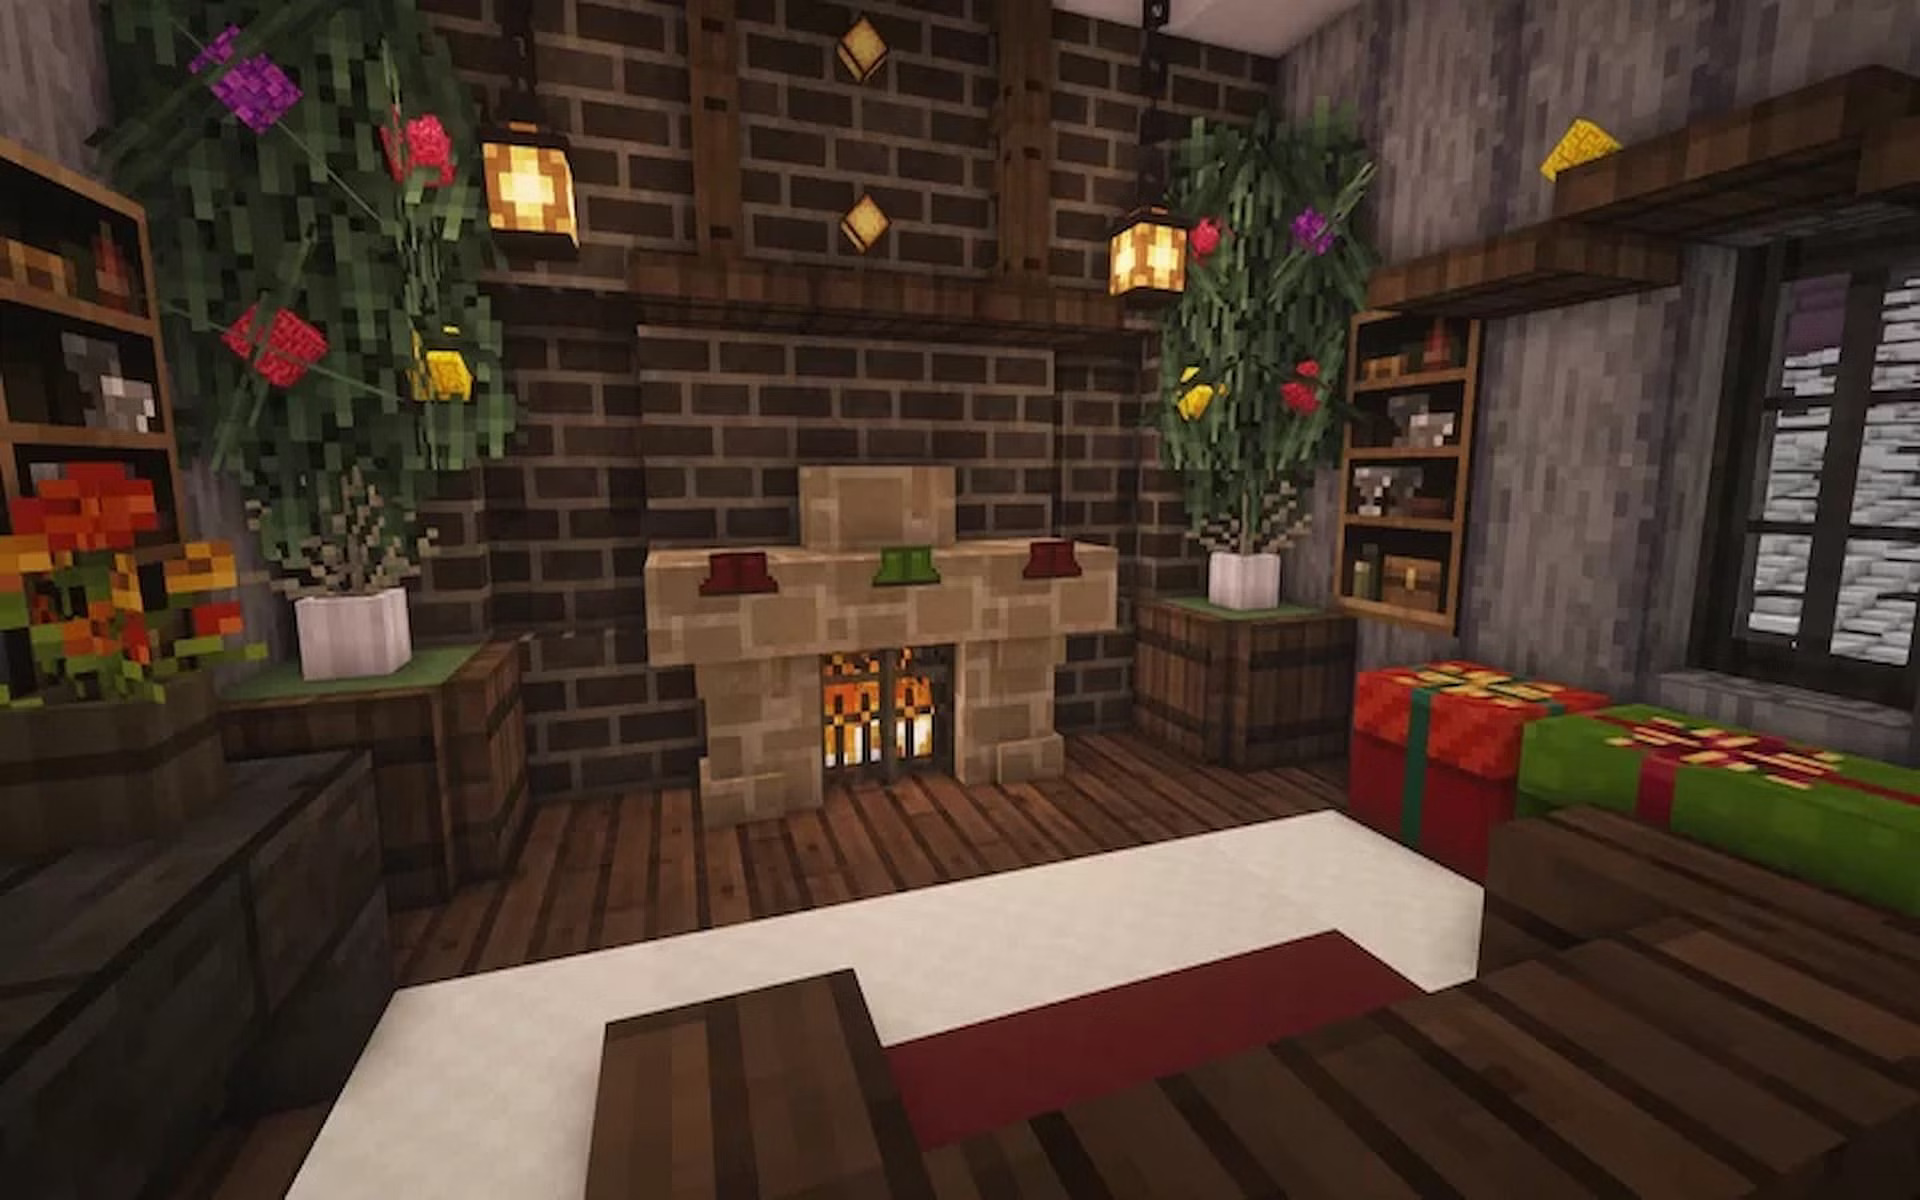 Steps you can follow to build a fireplace in Minecraft